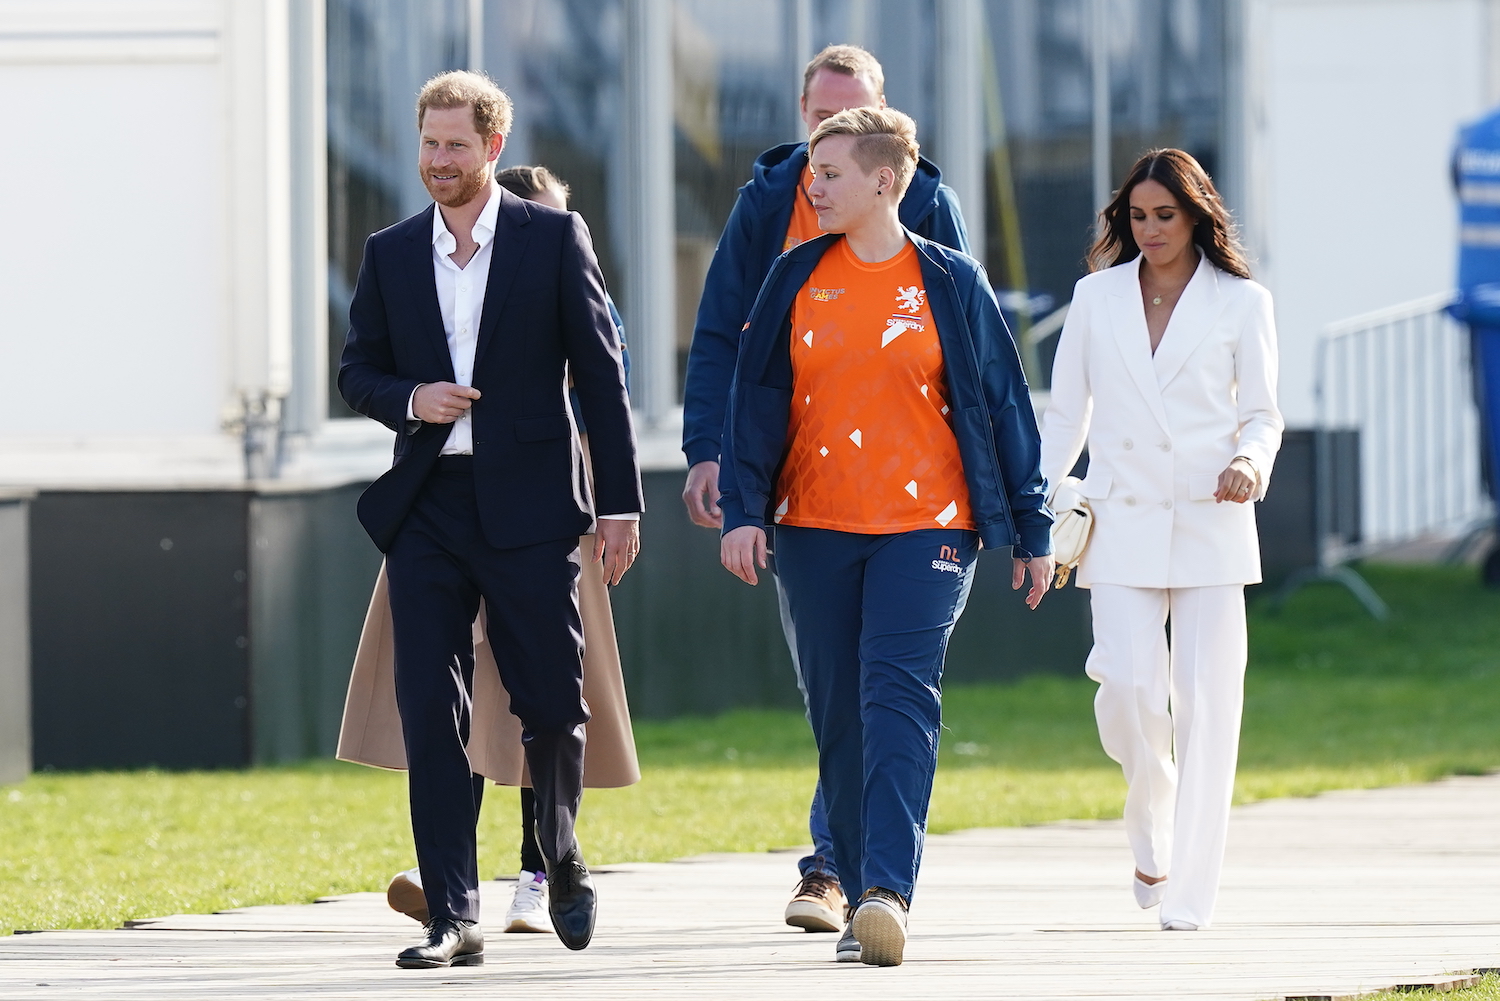 Prince Harry wears a dark suit and Meghan Markle wears a white pantsuit while walking at a reception for the Invictus Games